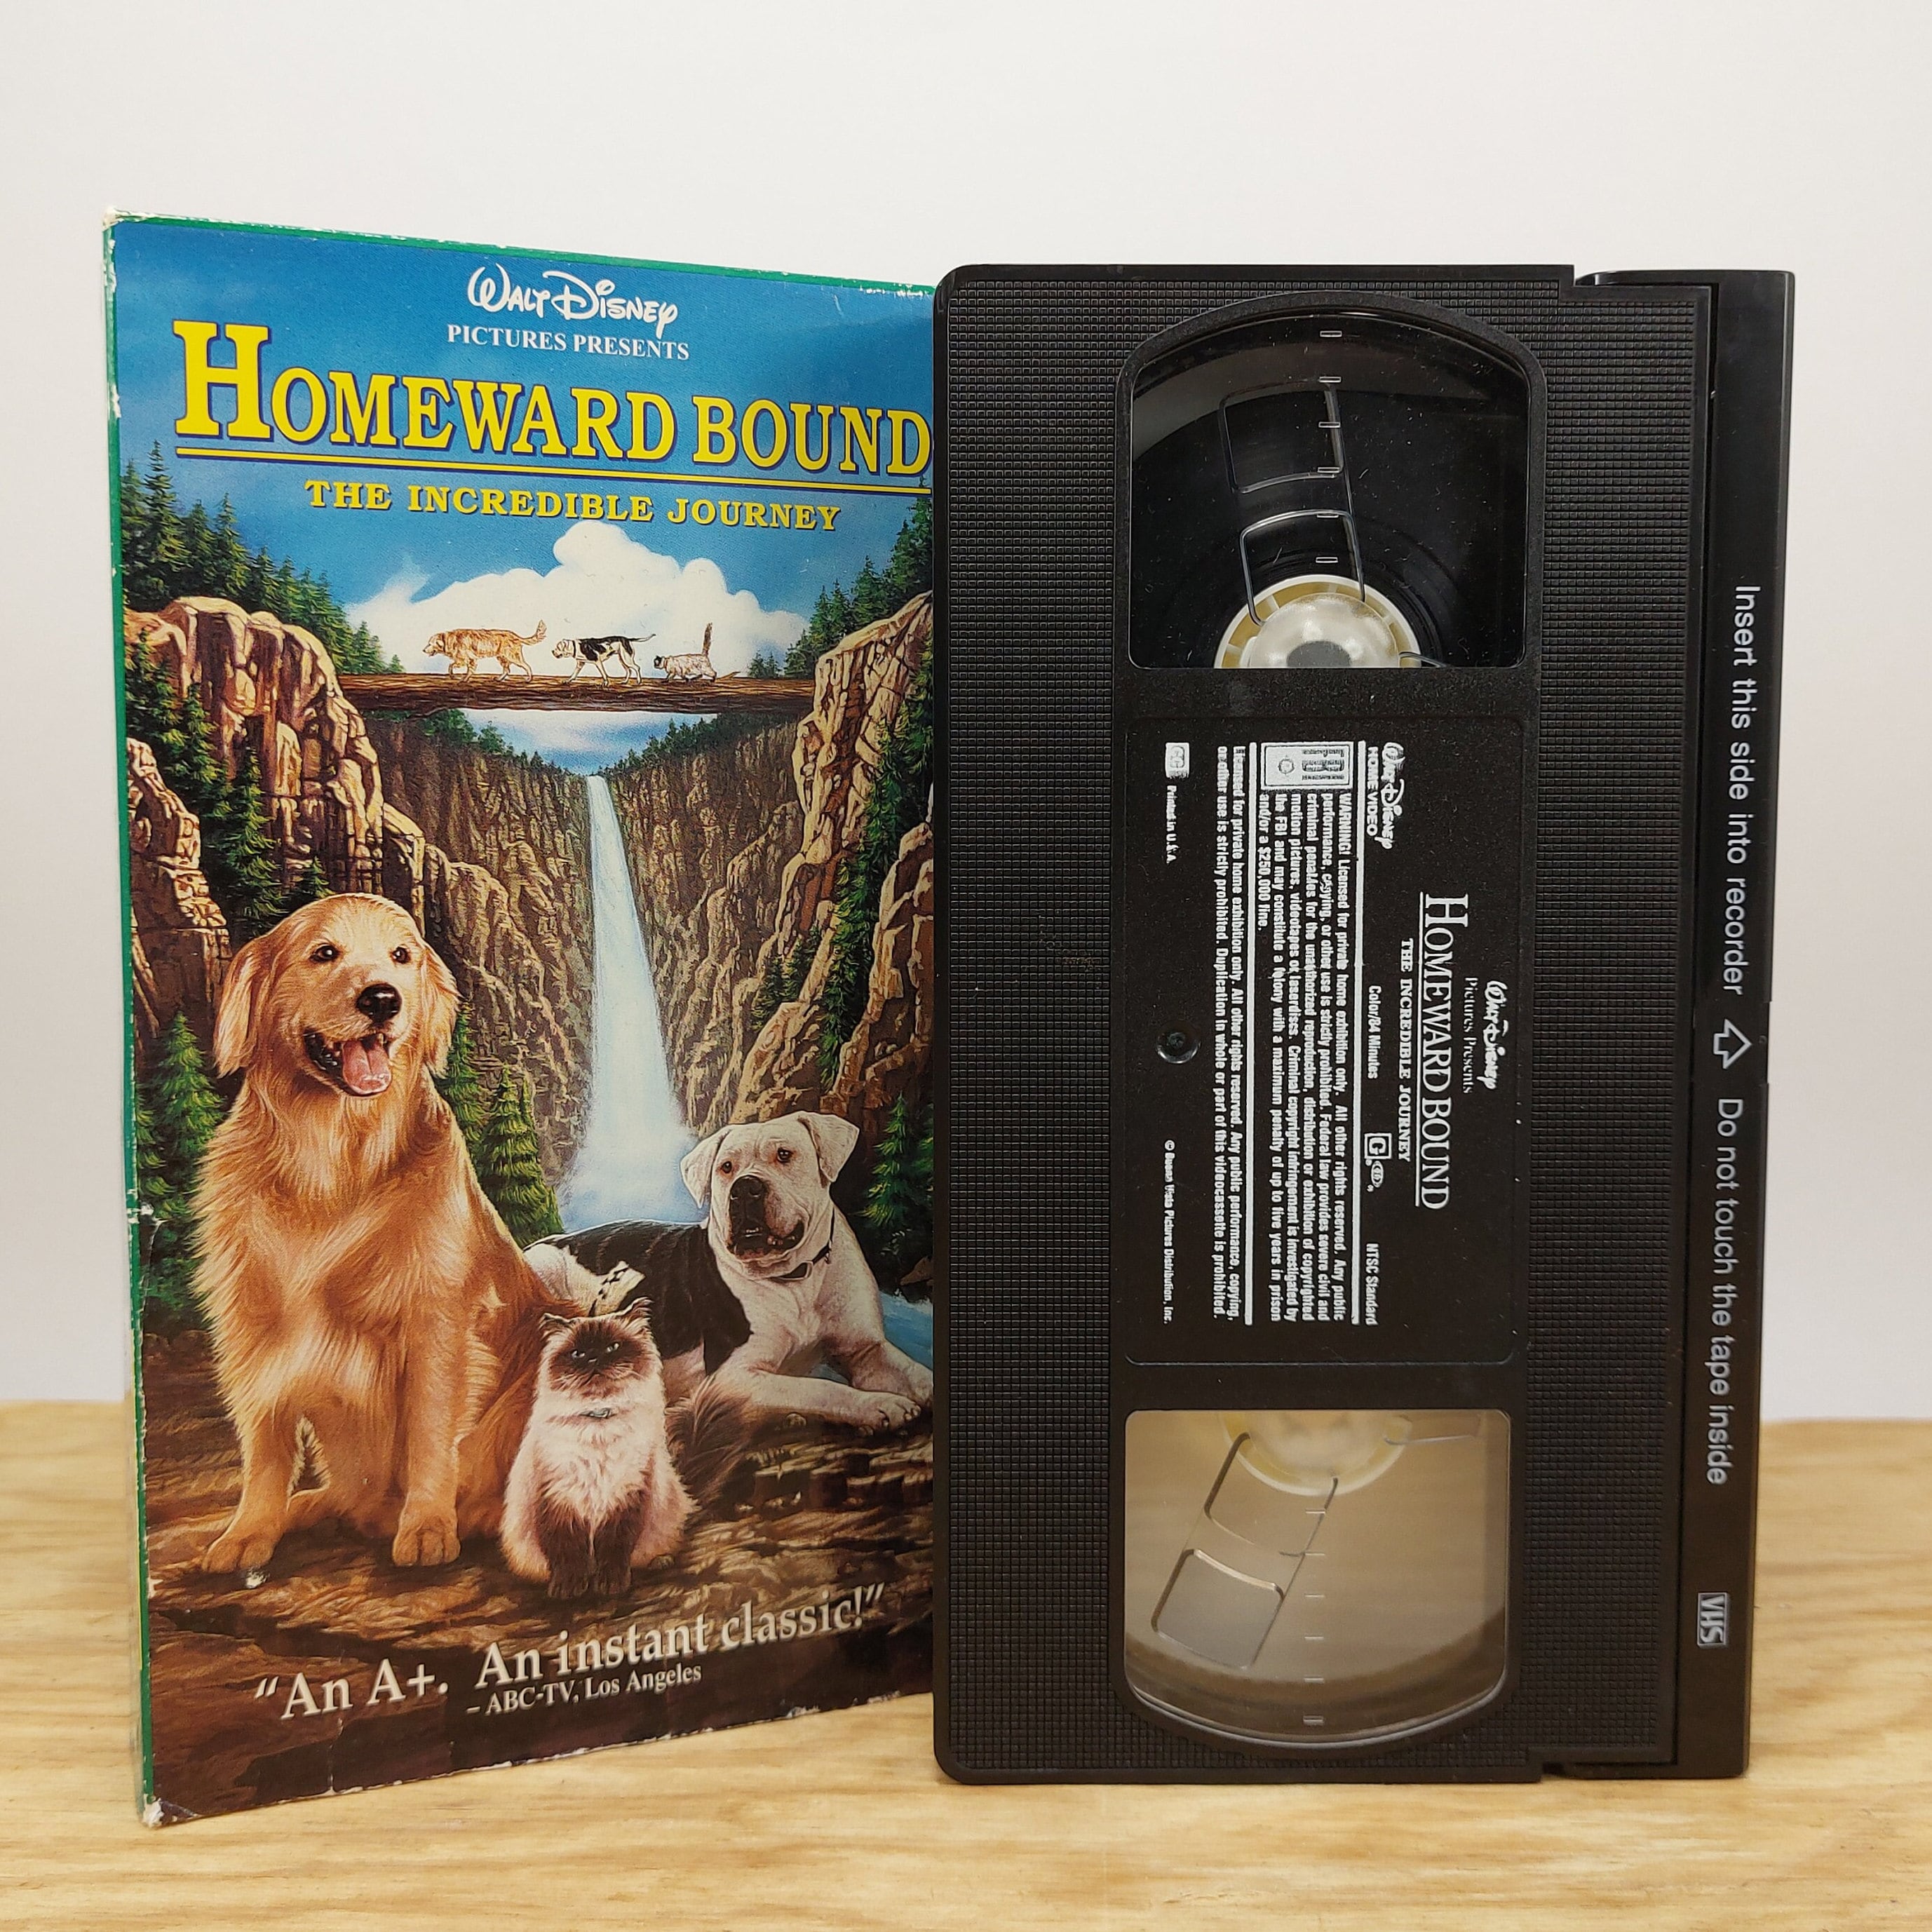 homeward bound the incredible journey 1993